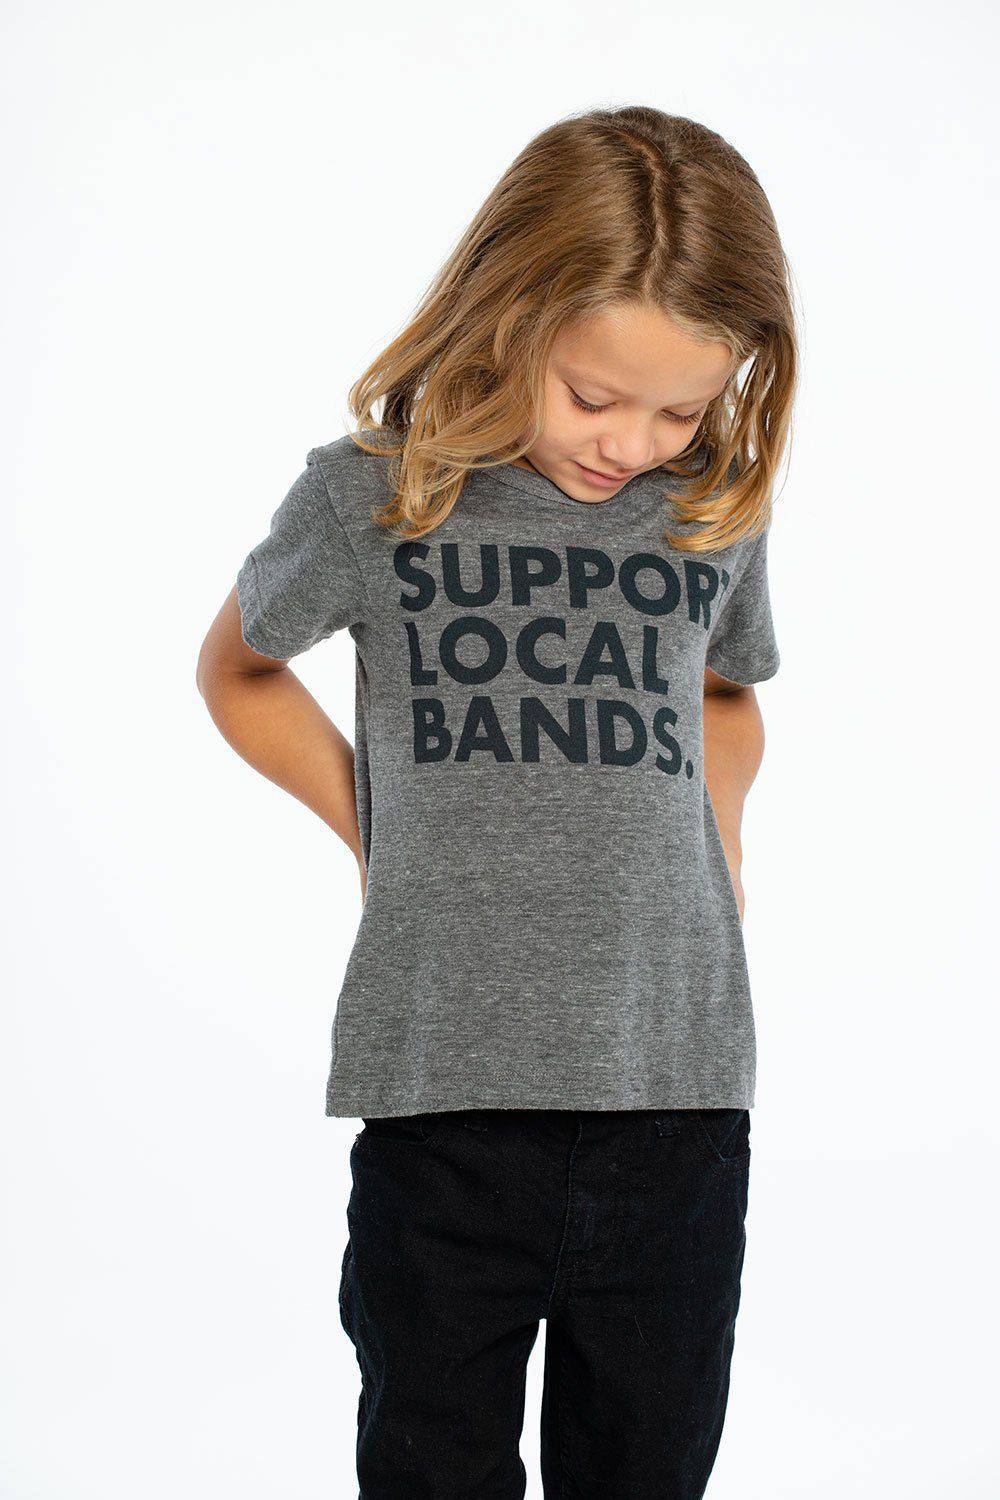 Support Local Bands Tee - Twinkle Twinkle Little One